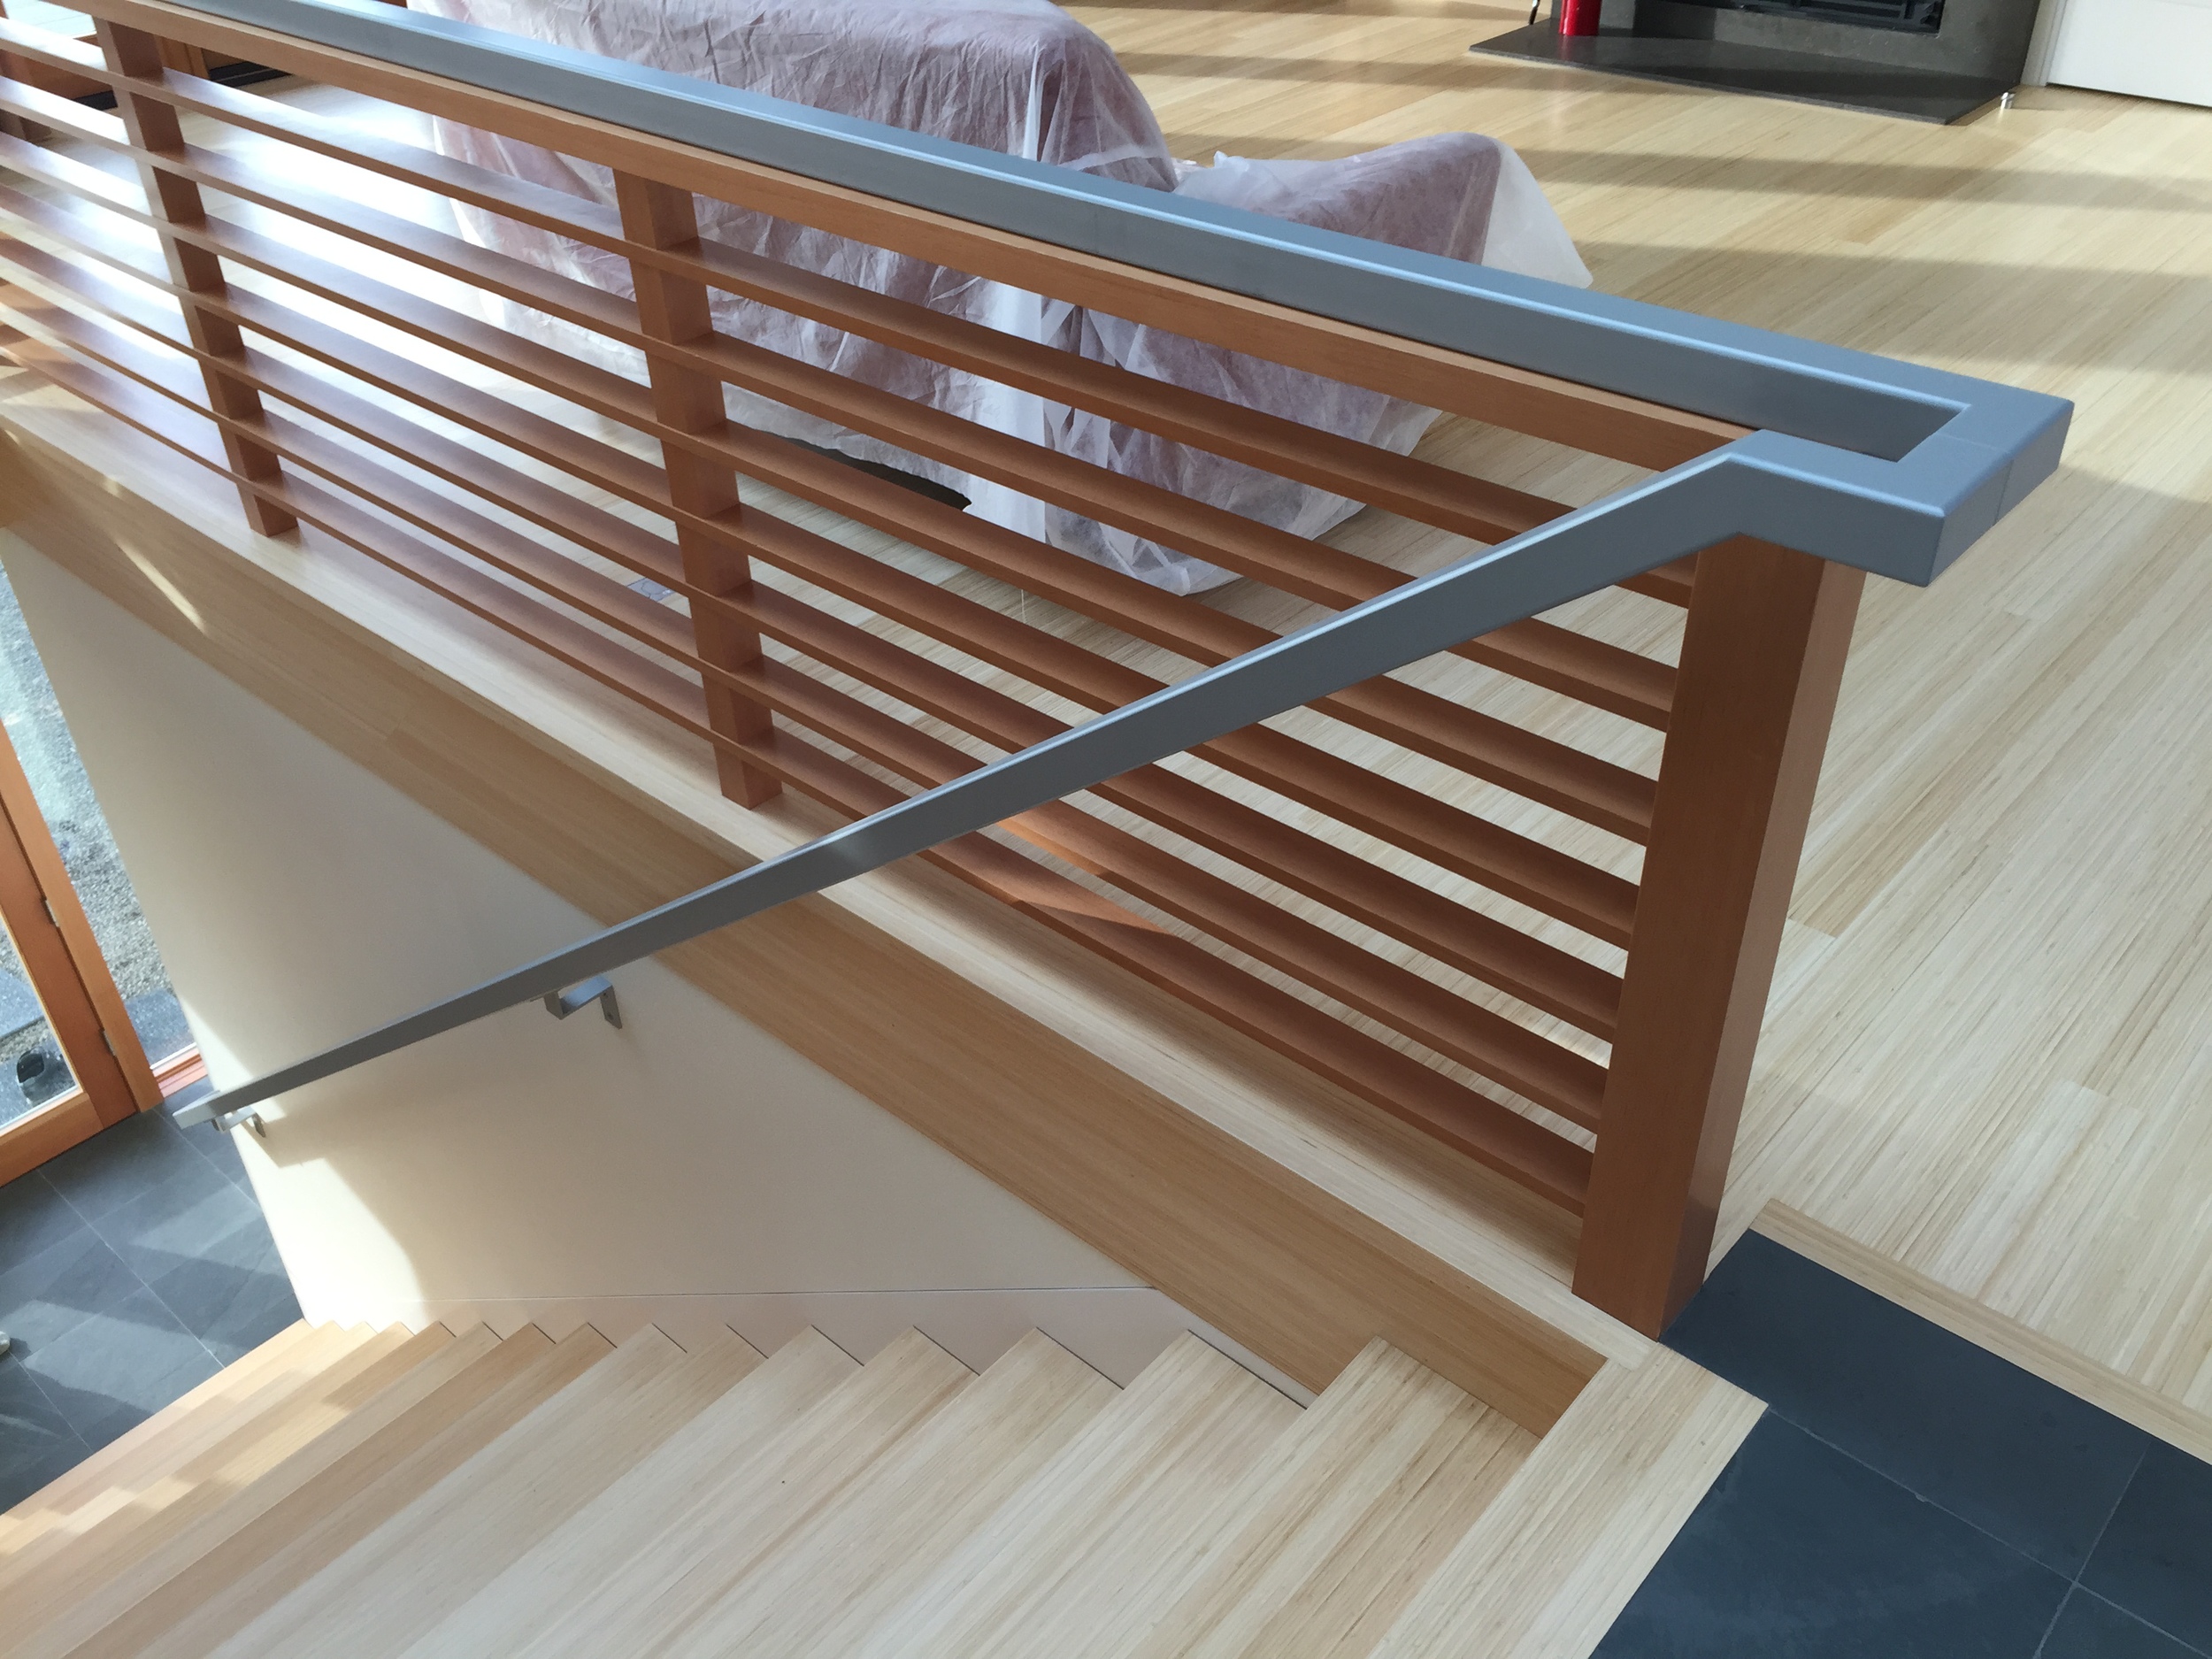  Steel grab rail. &nbsp;Wood done by Green Gables Construction  Designed by Pete Retondo Architecture 